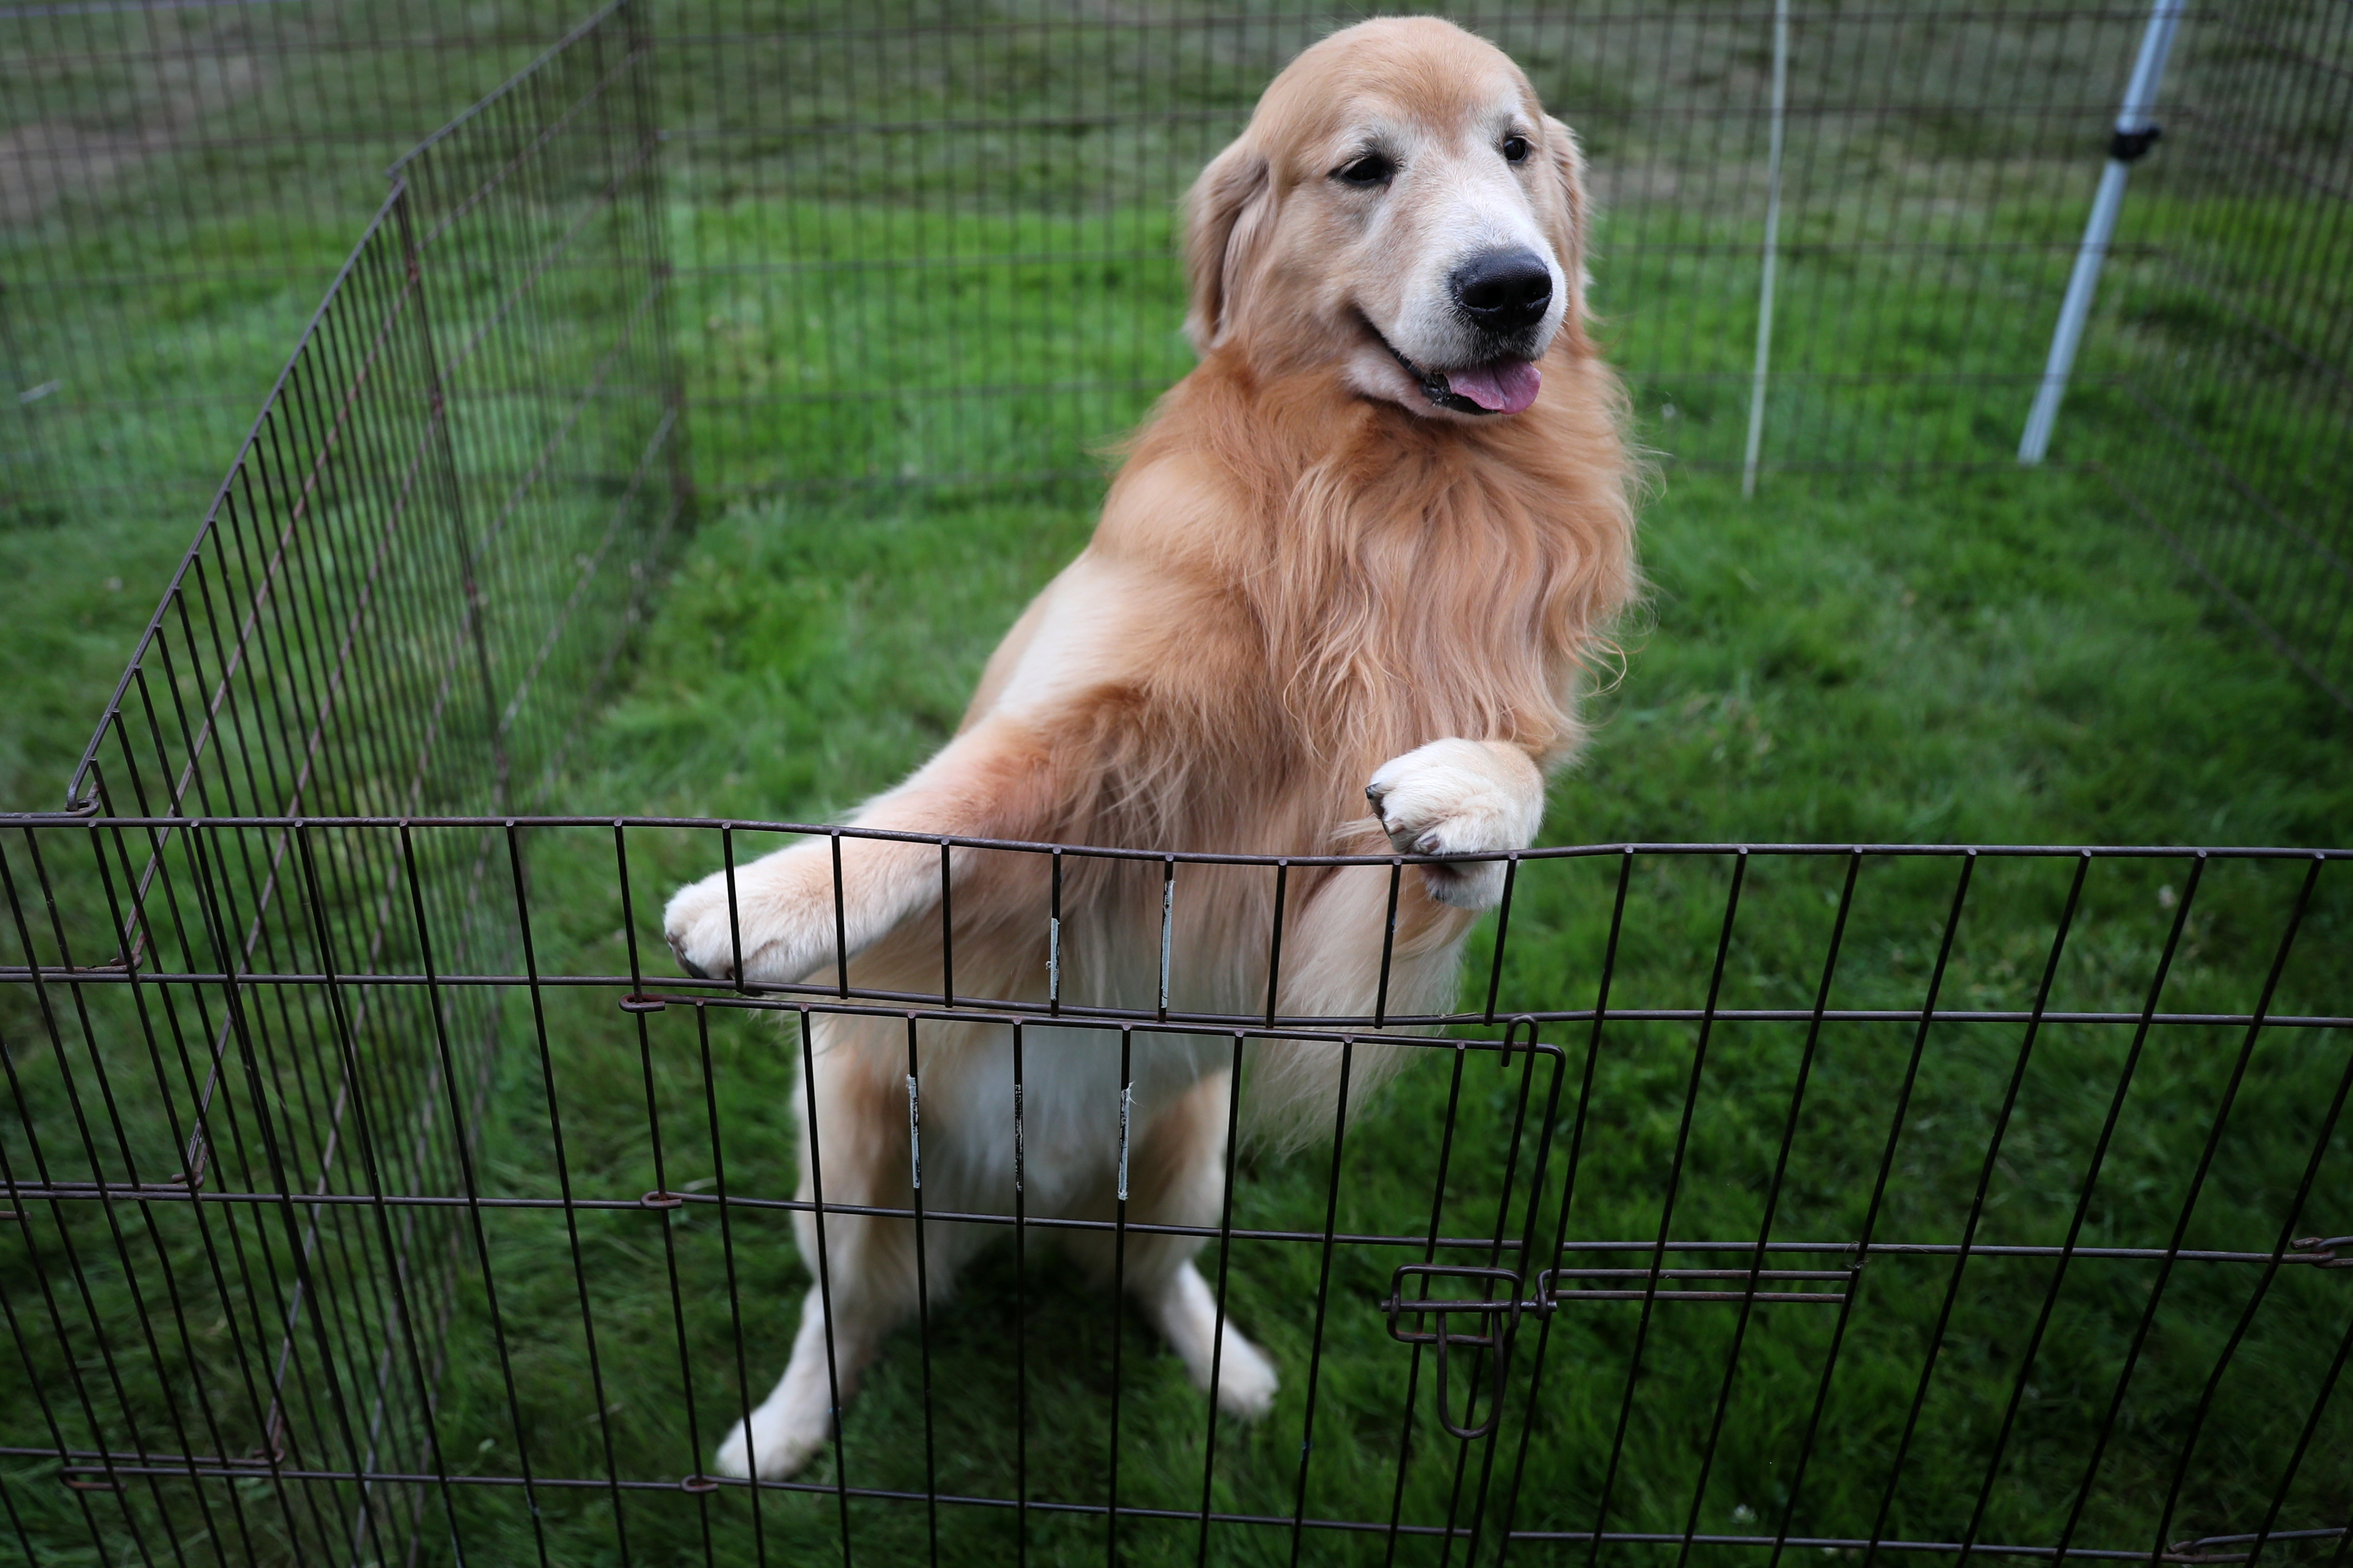 The 145th Westminster Kennel Club Dog Show at Lyndhurst Mansion in Tarrytown, New York